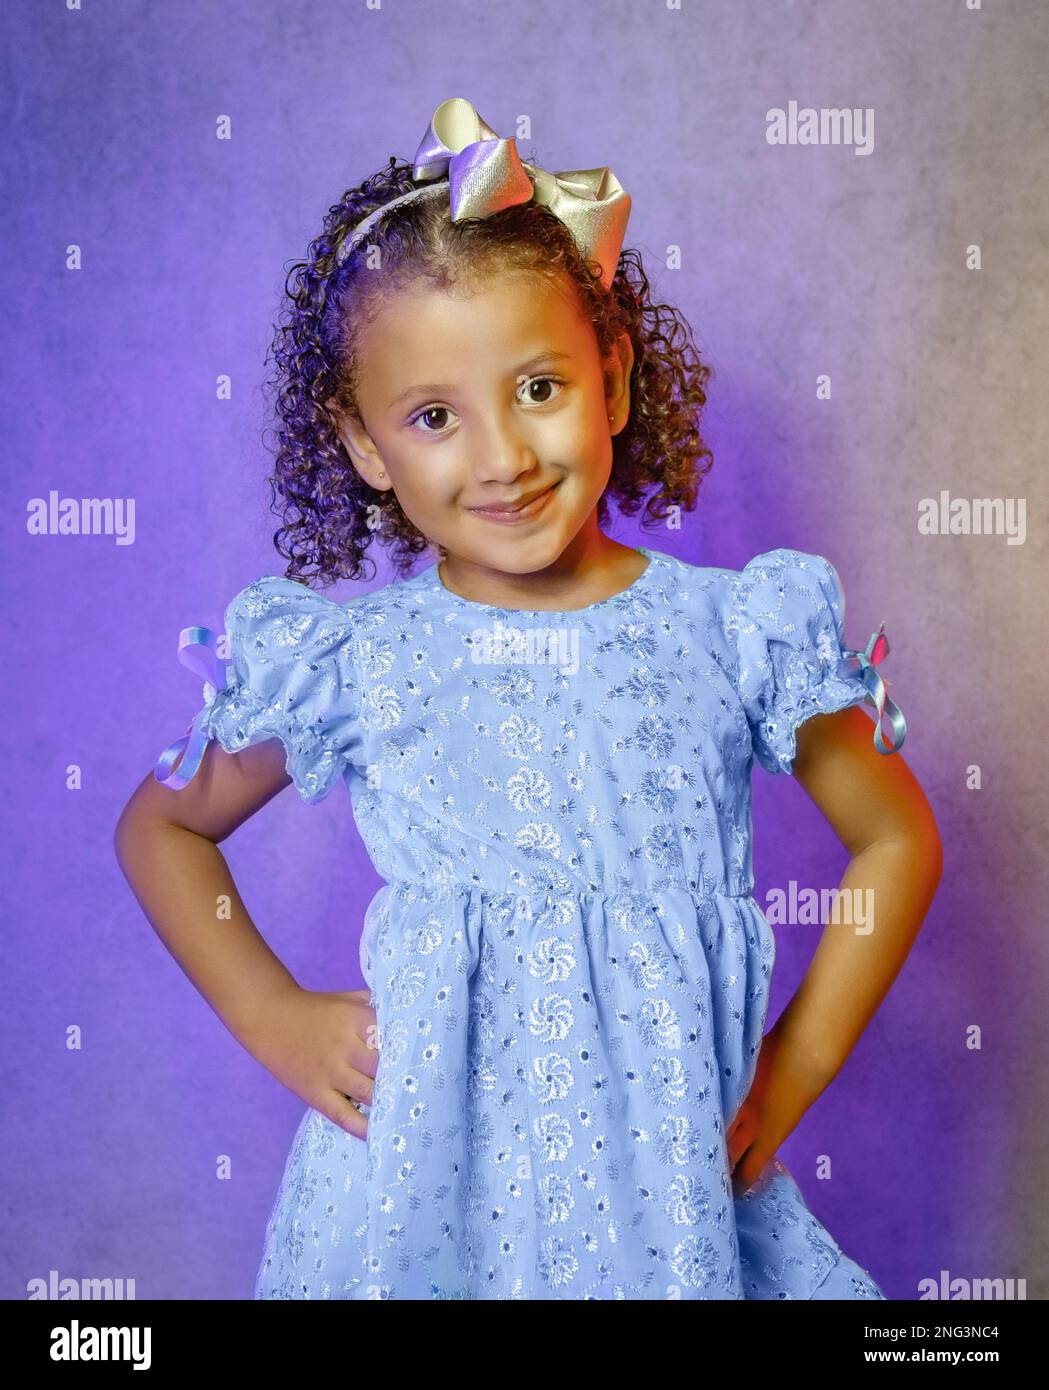 Studio portrait of beautiful little girl in beautiful blue dress on purple background, brazilian girl smiling, giving kisses and making funny faces Stock Photo